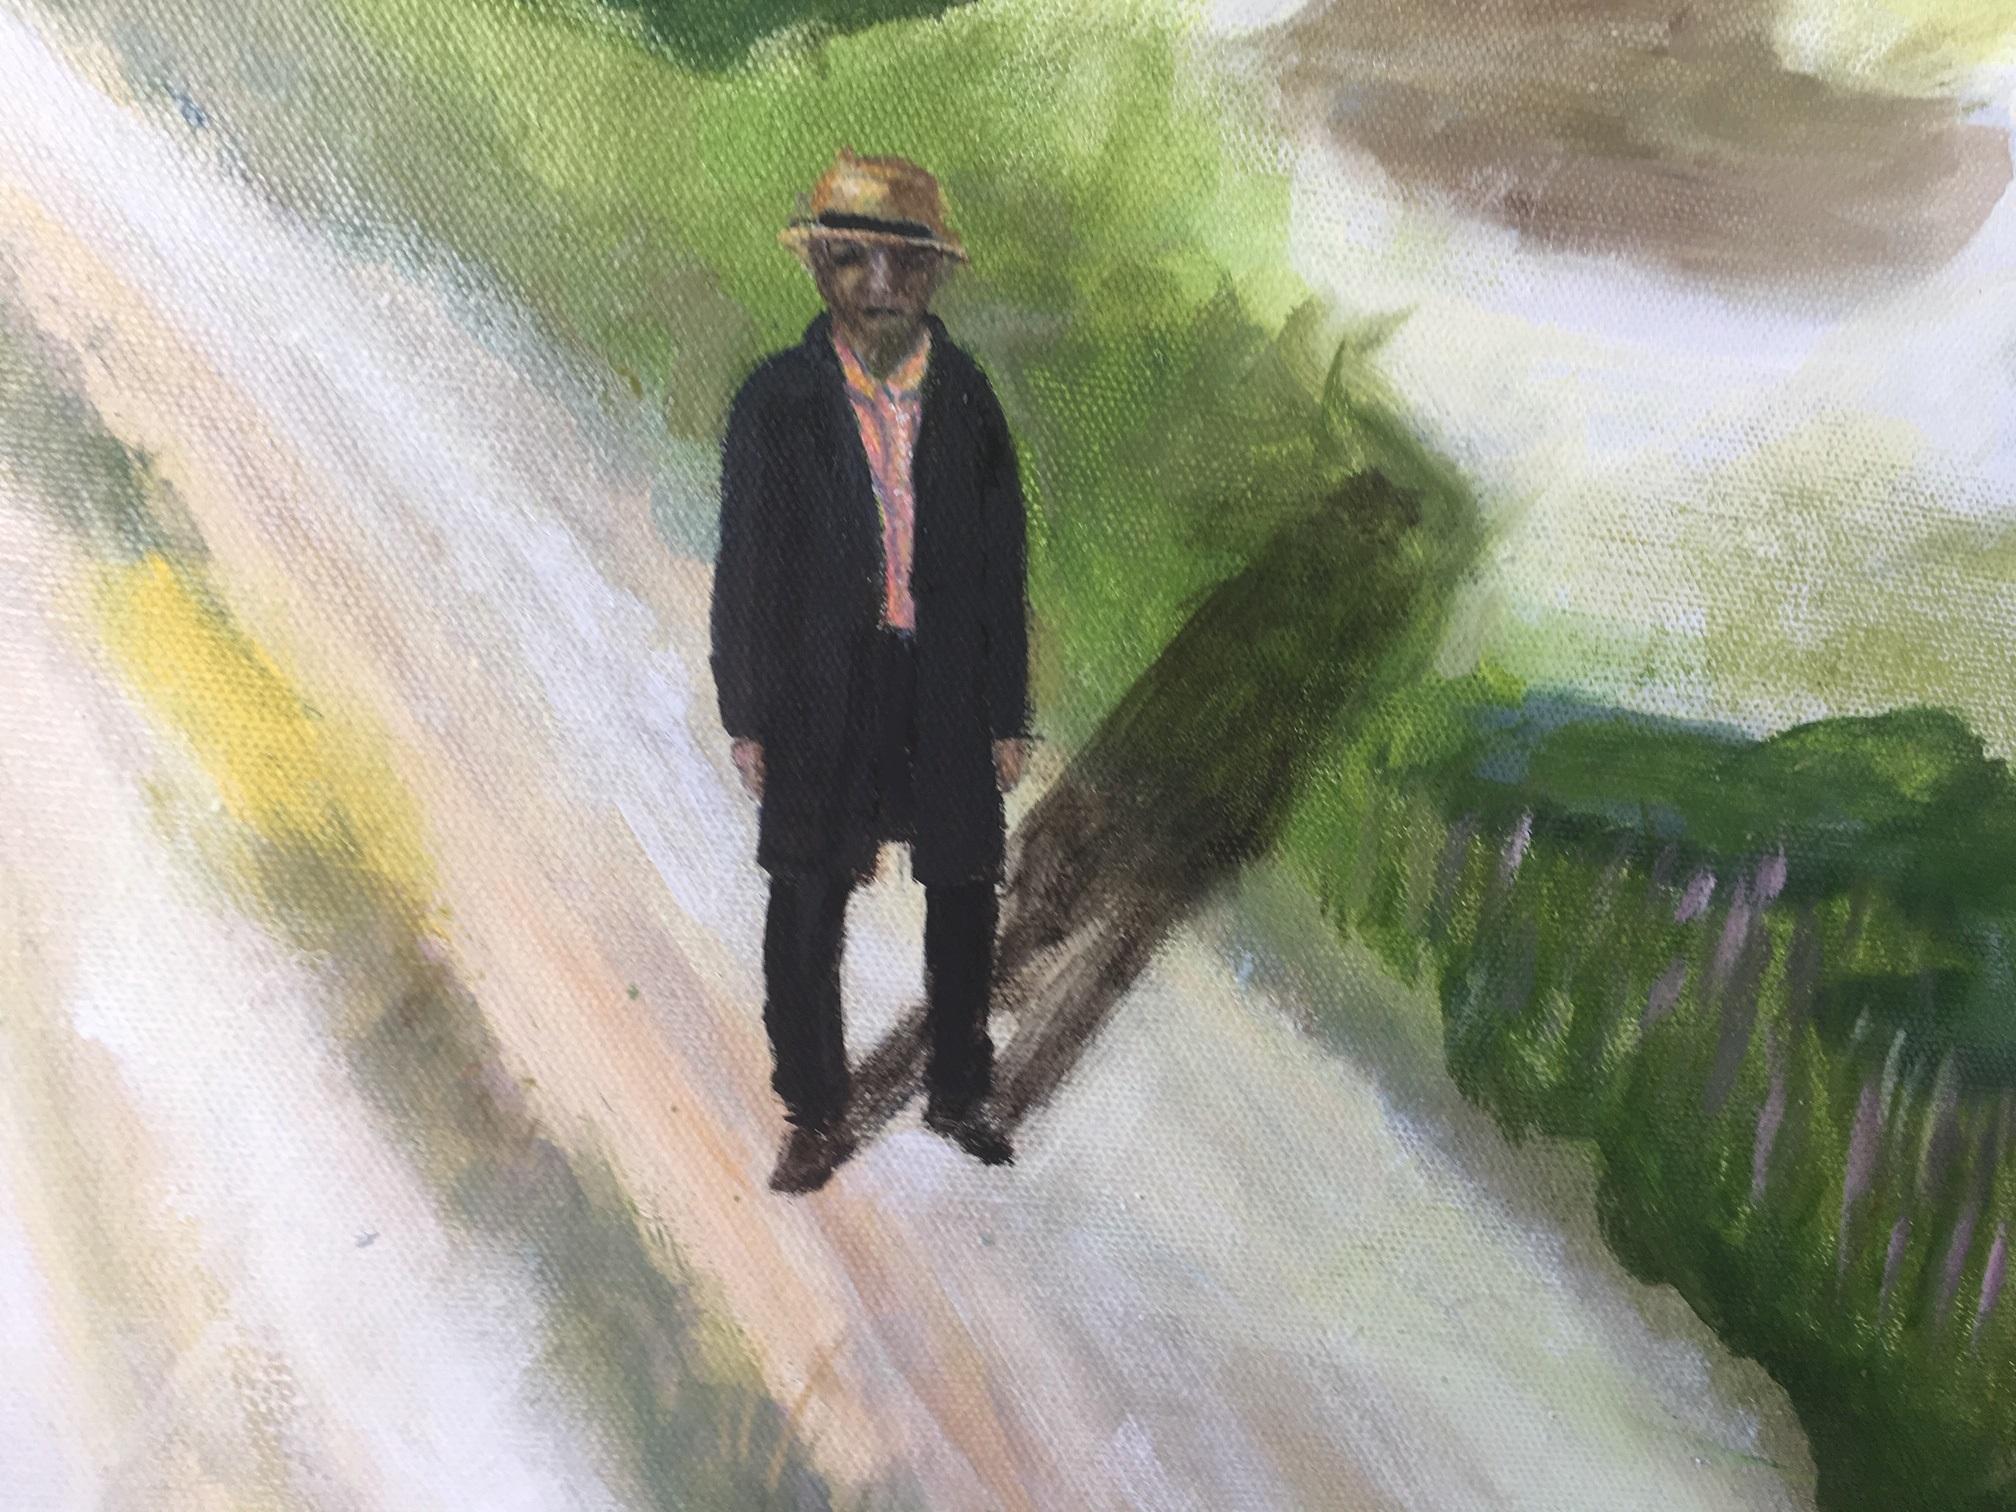 Contemporary, figurative, surrealistic oil on canvas painting by the Danish painter Bente Ørum, 2018.

Lonely Man Walking between the Moor and the Dunes 

About the artist:
Bente Ørum's paintings are figurative, often with a hint of surrealism.